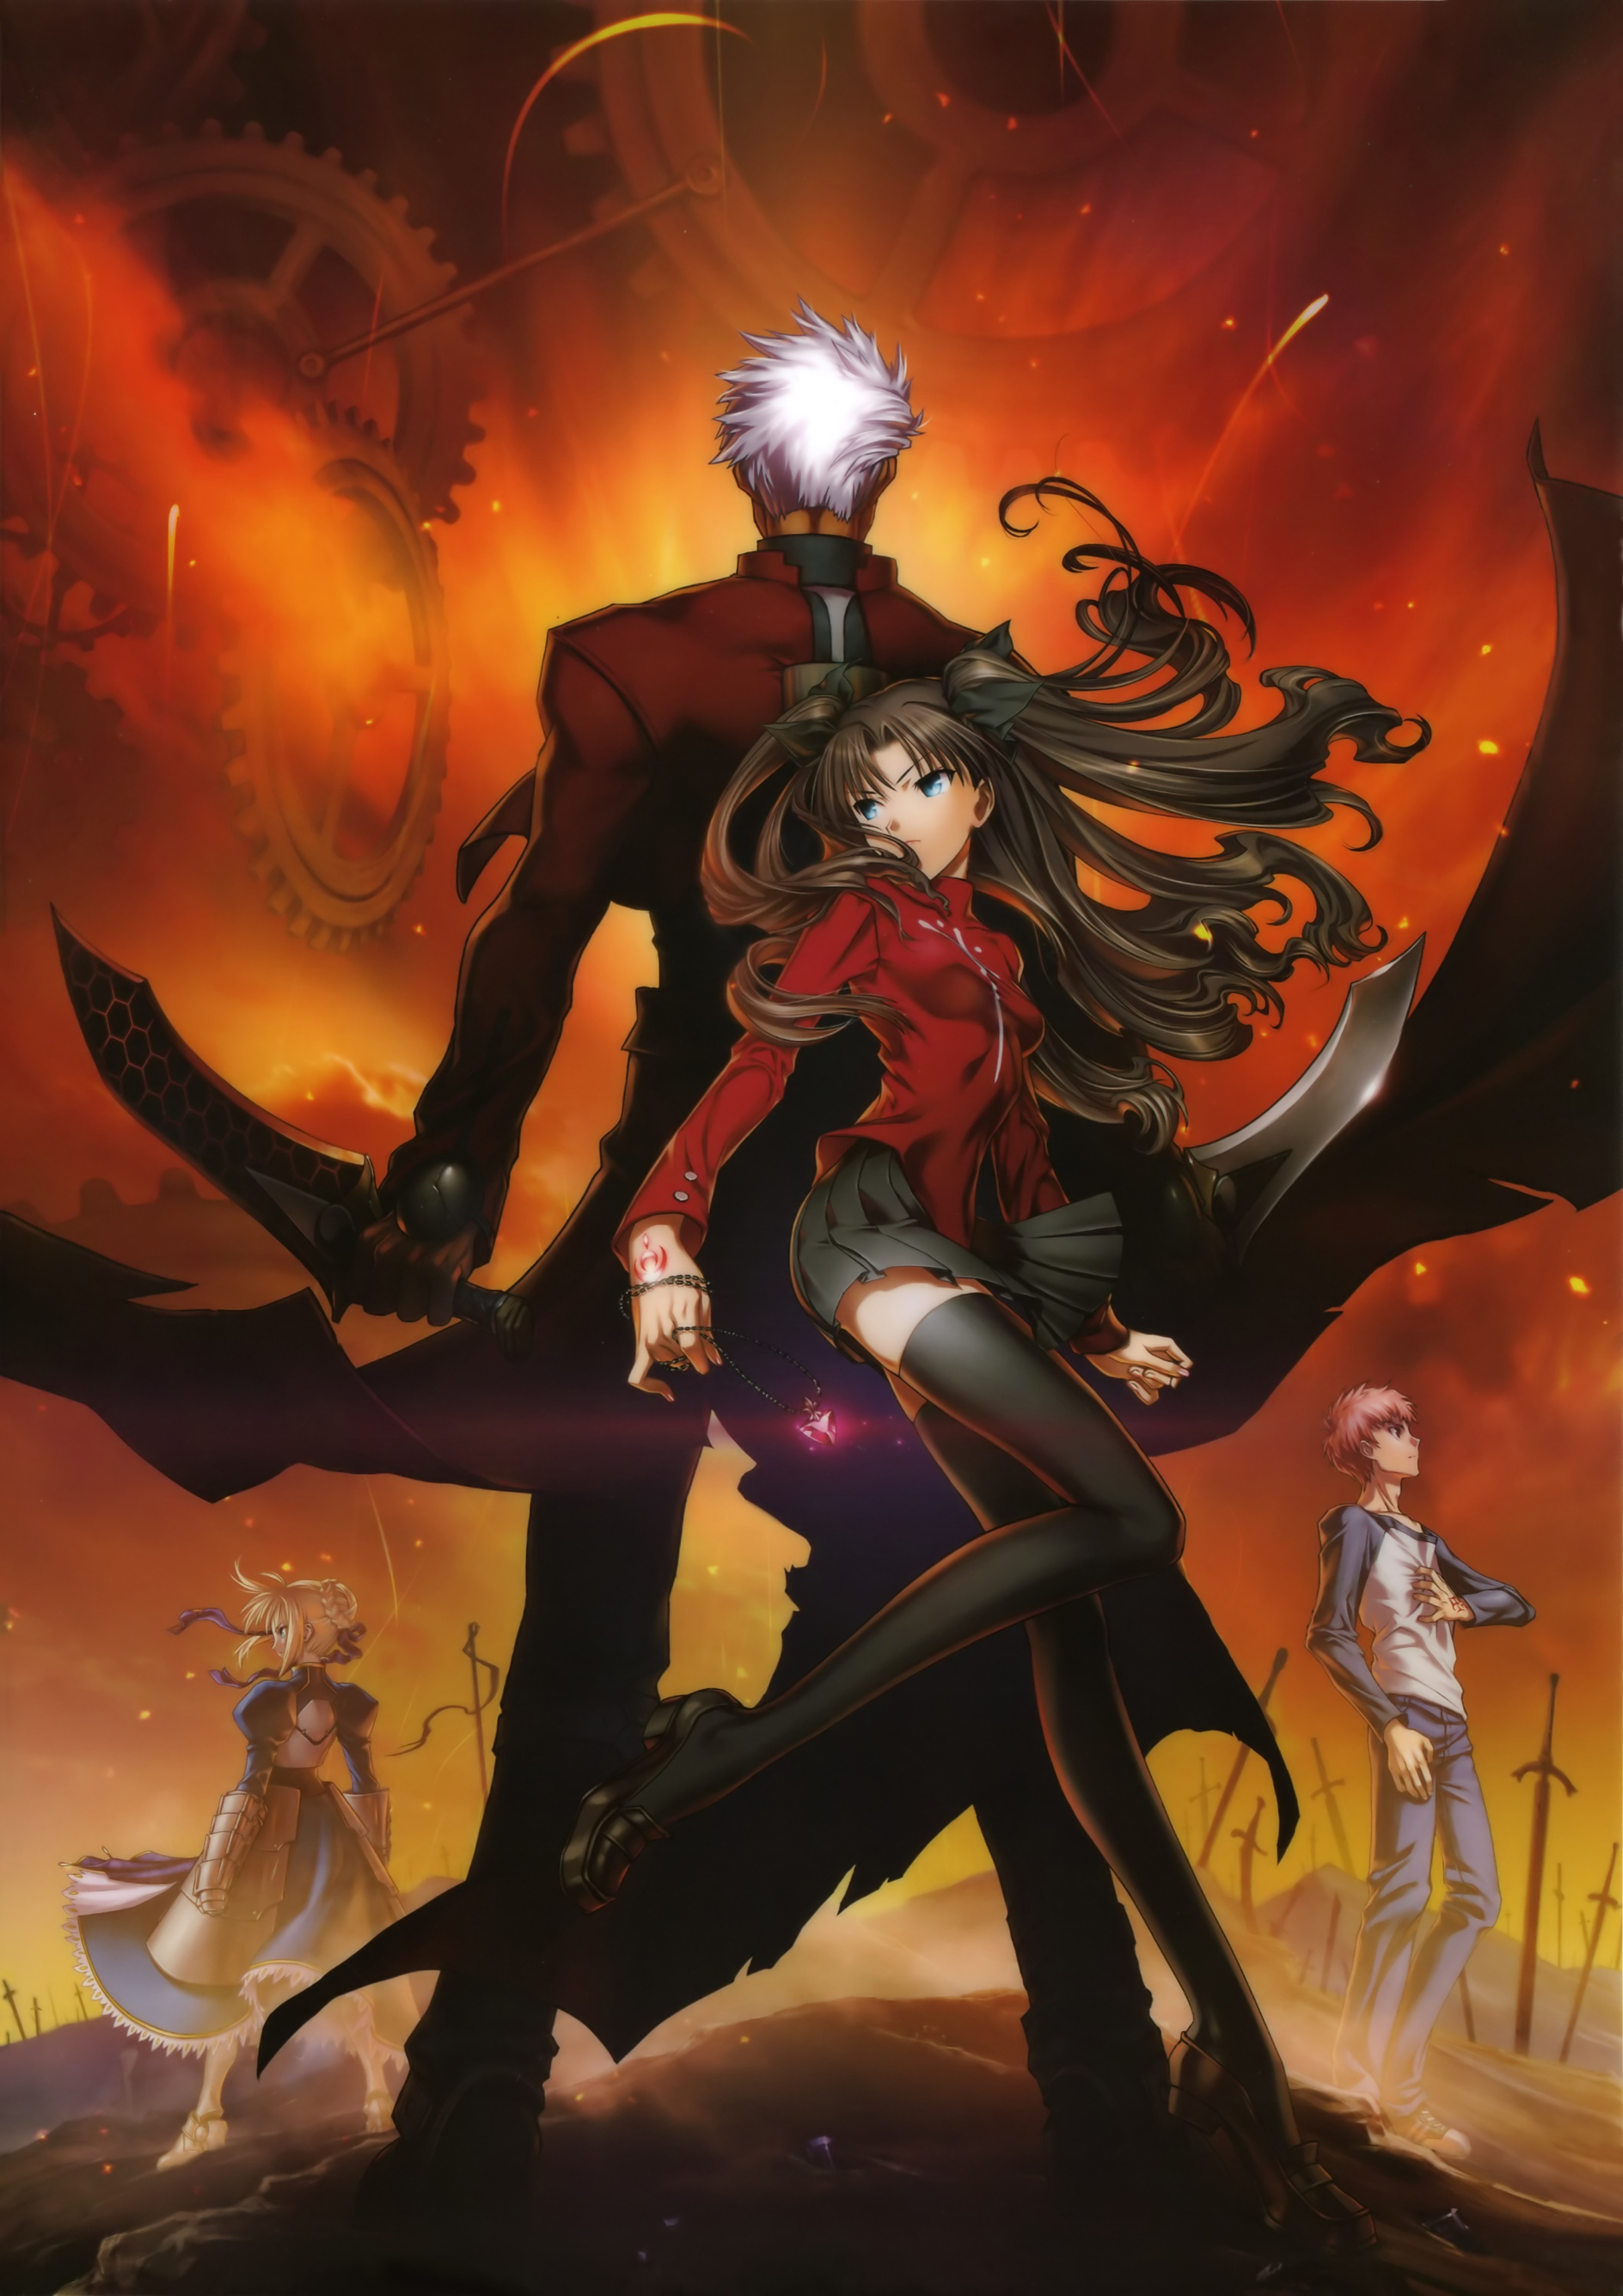 Fate/stay night [Unlimited Blade Works] Original Soundtrack